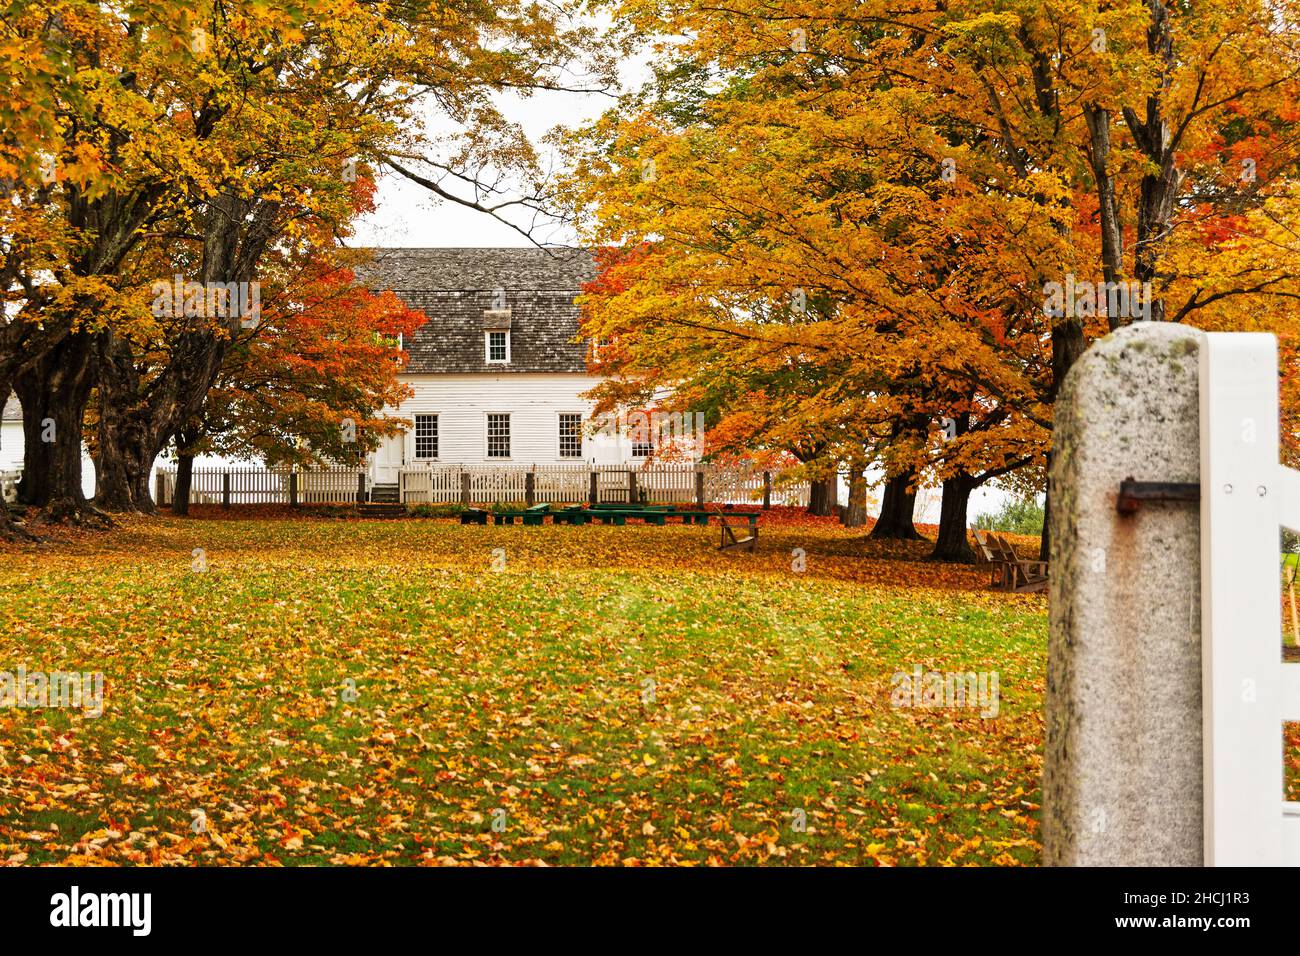 The meeting house sits in a field of fallen leaves. Canterbury Shaker Village, New Hampshire USA. Stock Photo